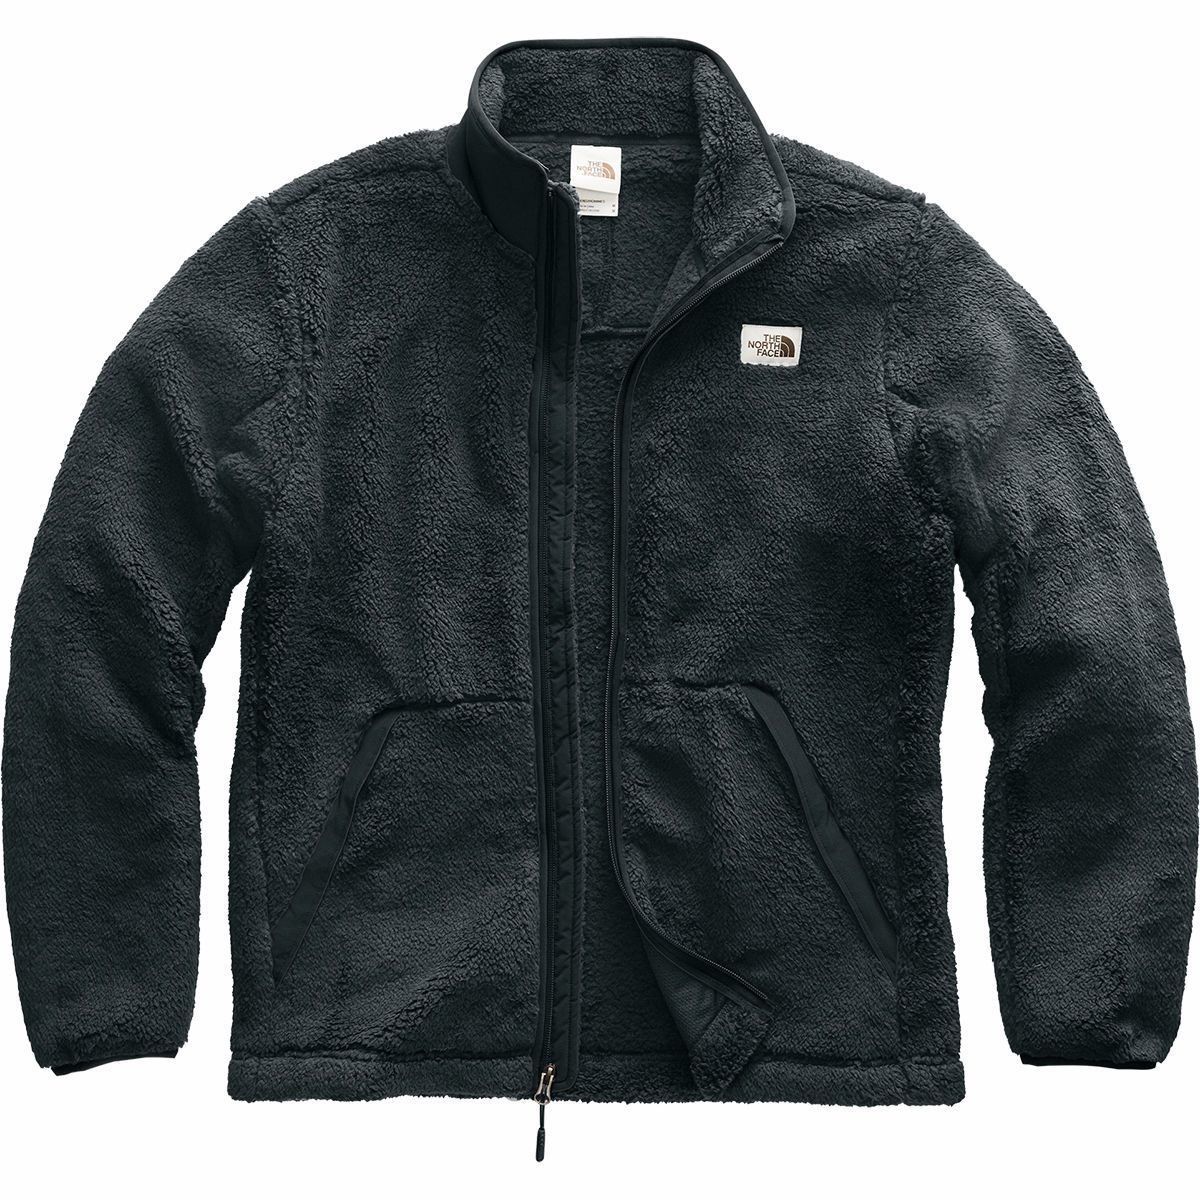 The North Face Campshire Full-Zip Fleece Jacket - Men's | Backcountry.com